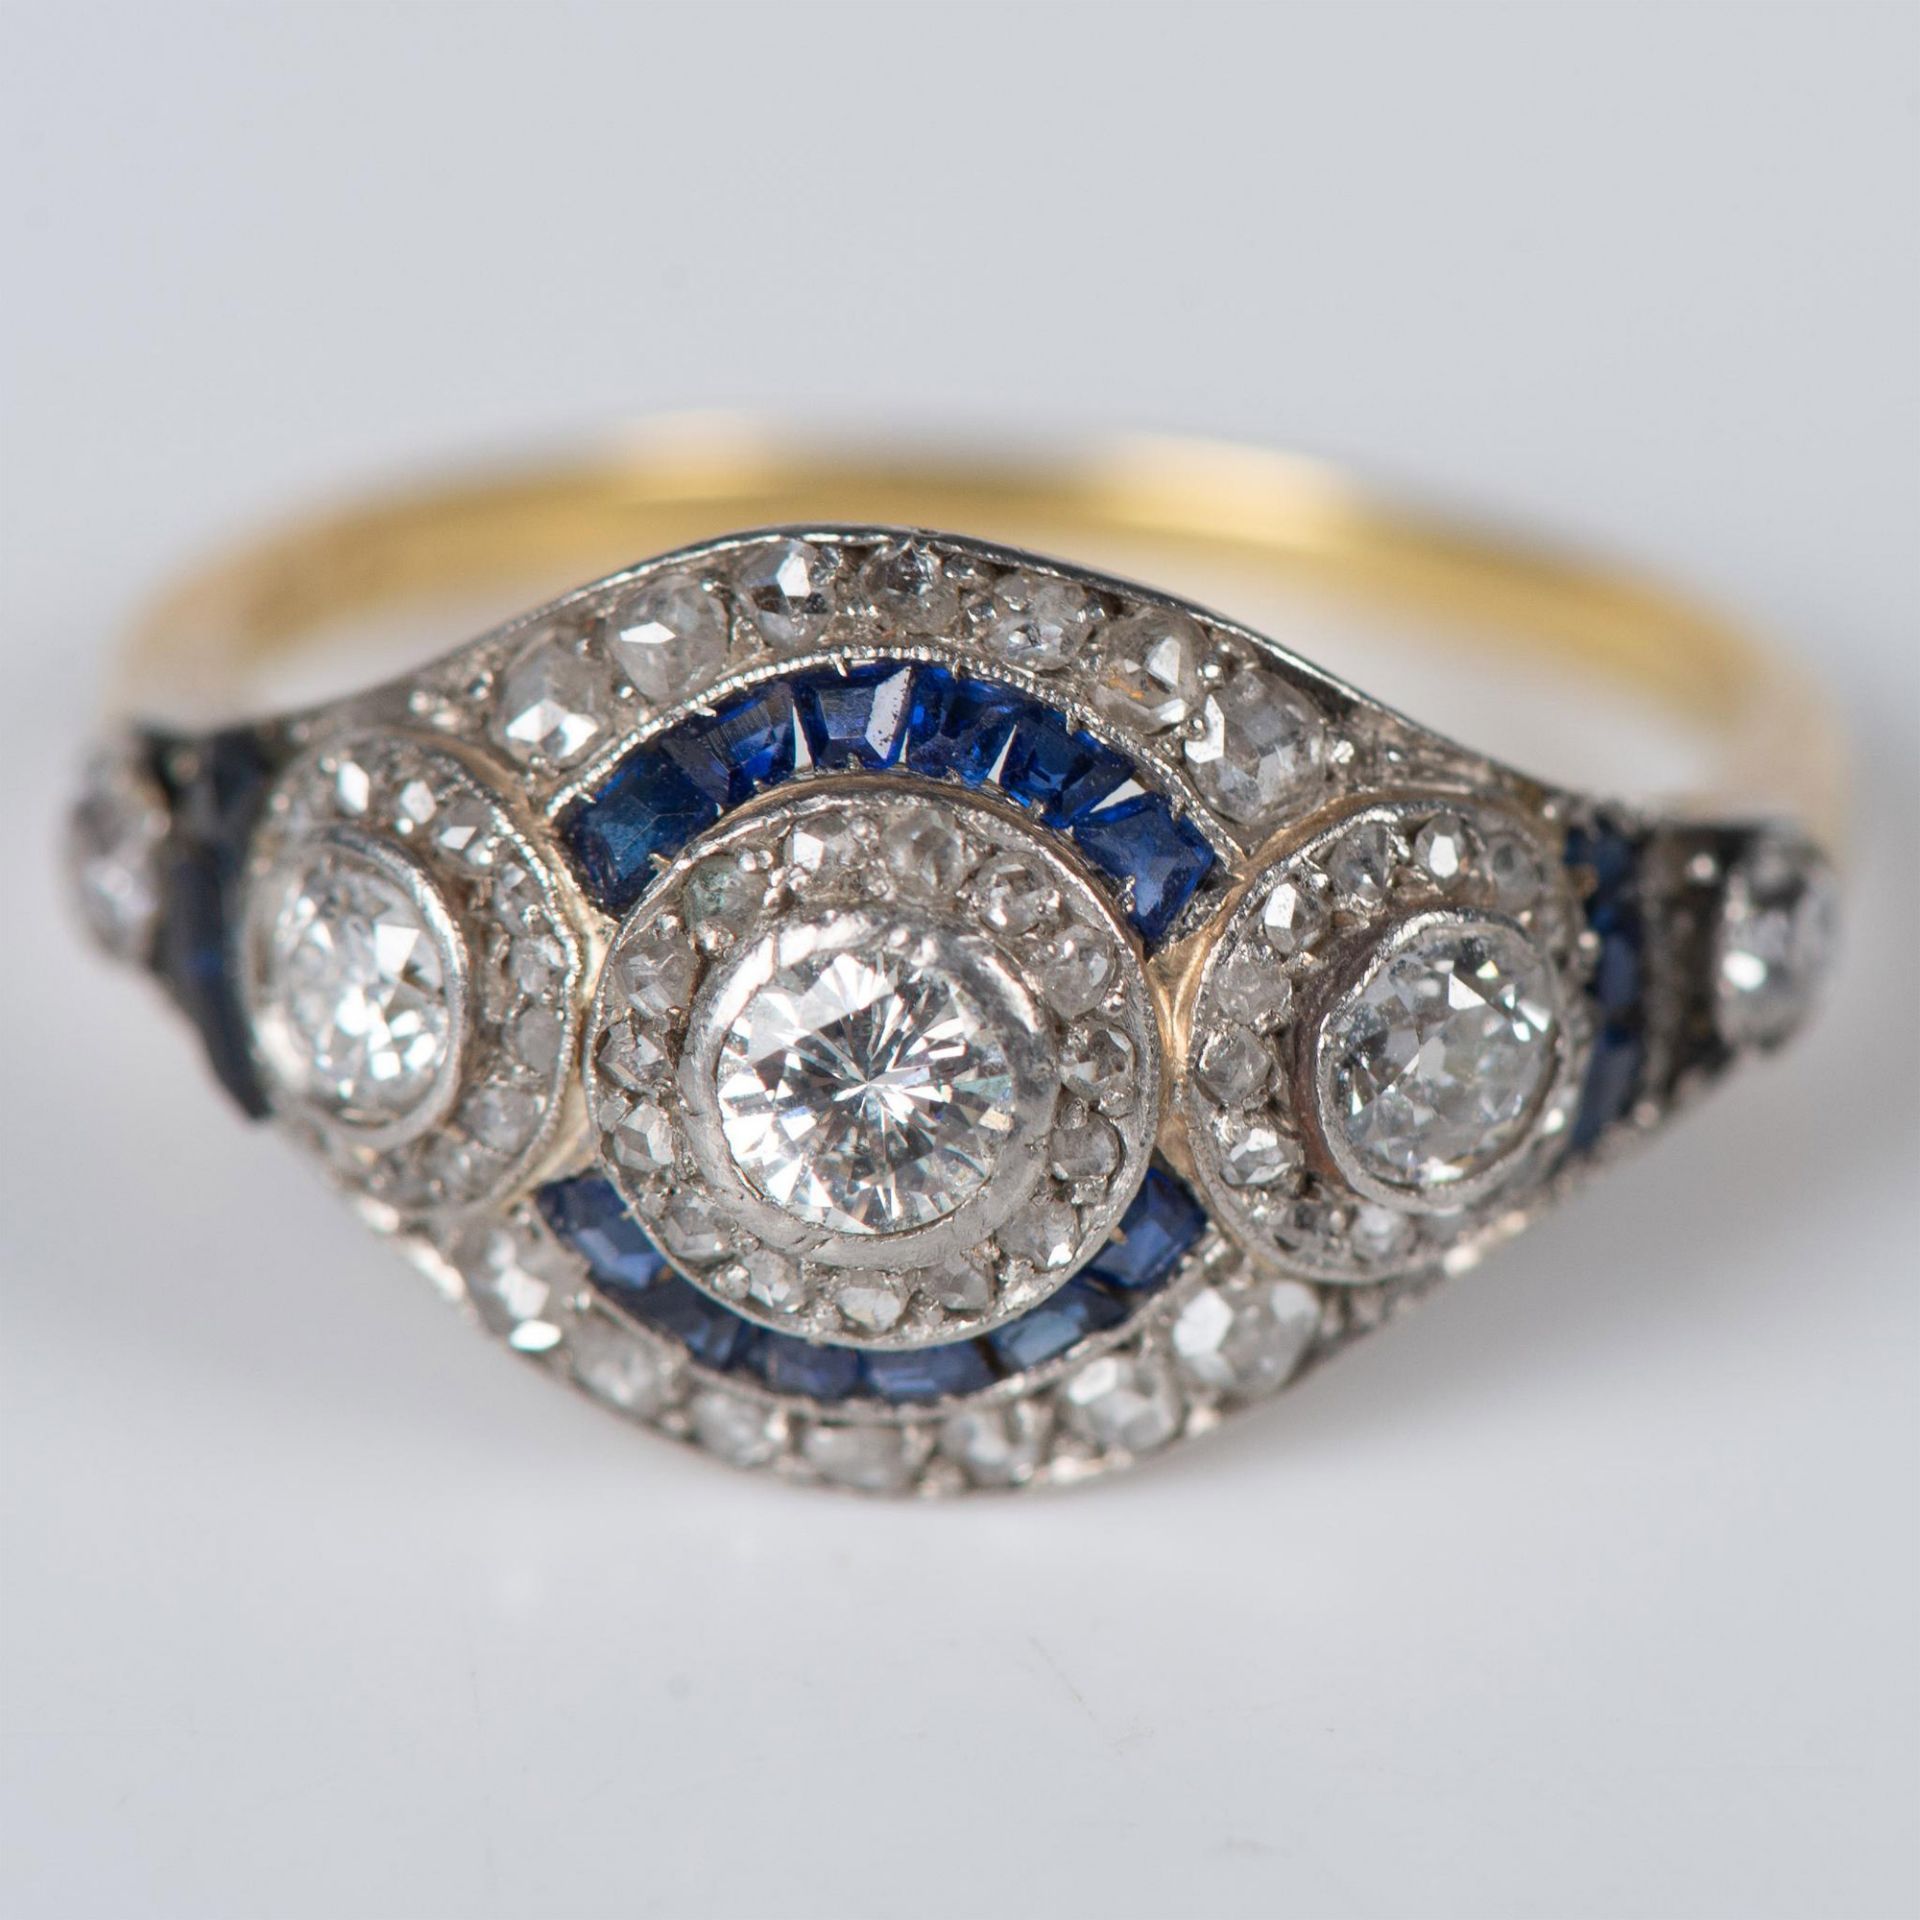 Art Deco 18K Gold, Diamonds and Sapphire Ring - Image 4 of 8